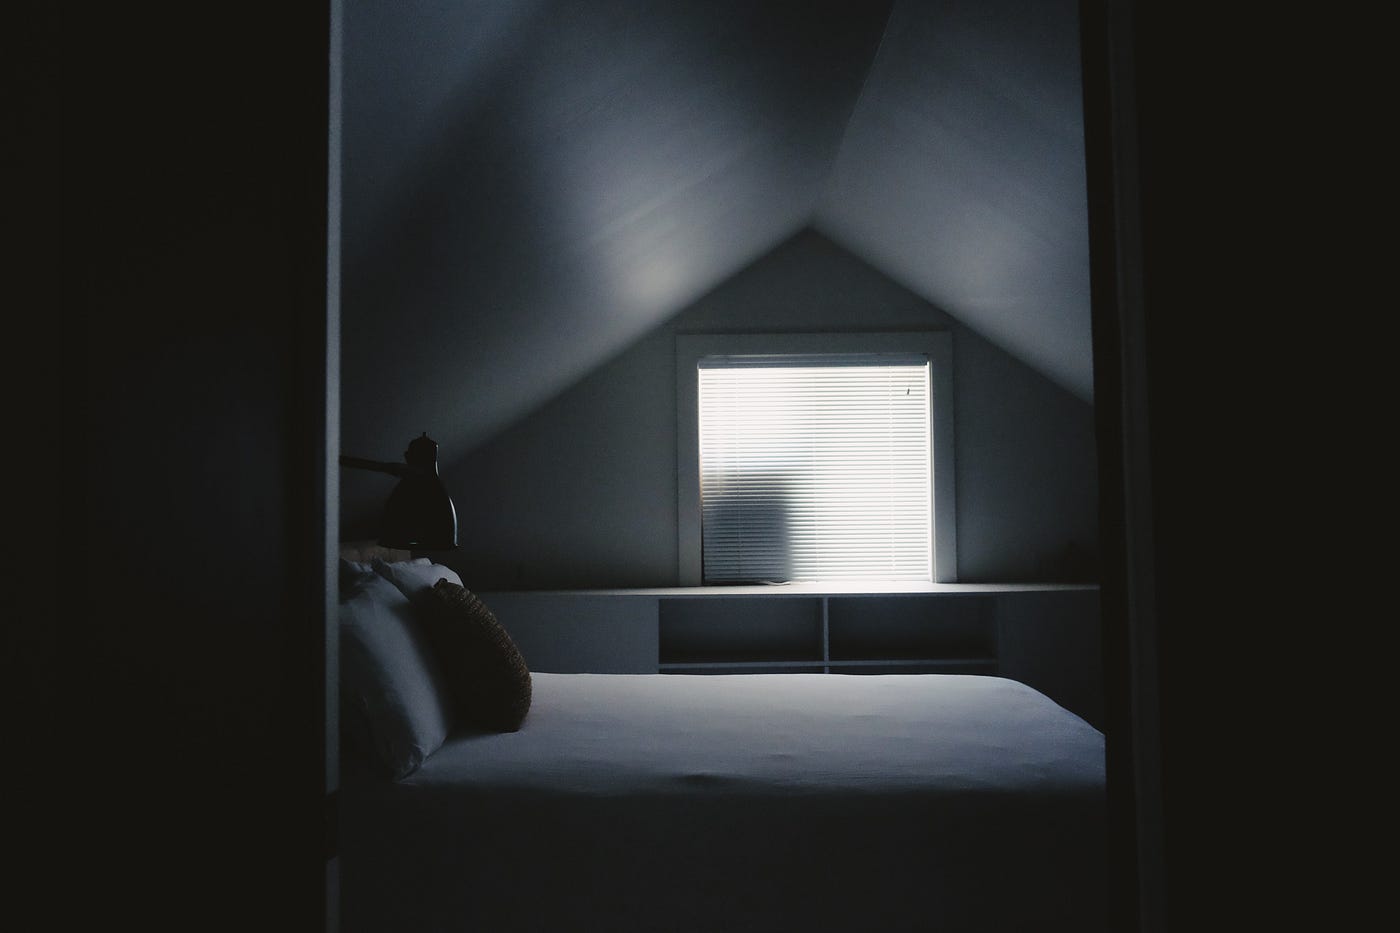 A black and white simple image of a bed in a darkened room. I am discovering this truth: With age, we sleep more lightly and get less deep sleep.